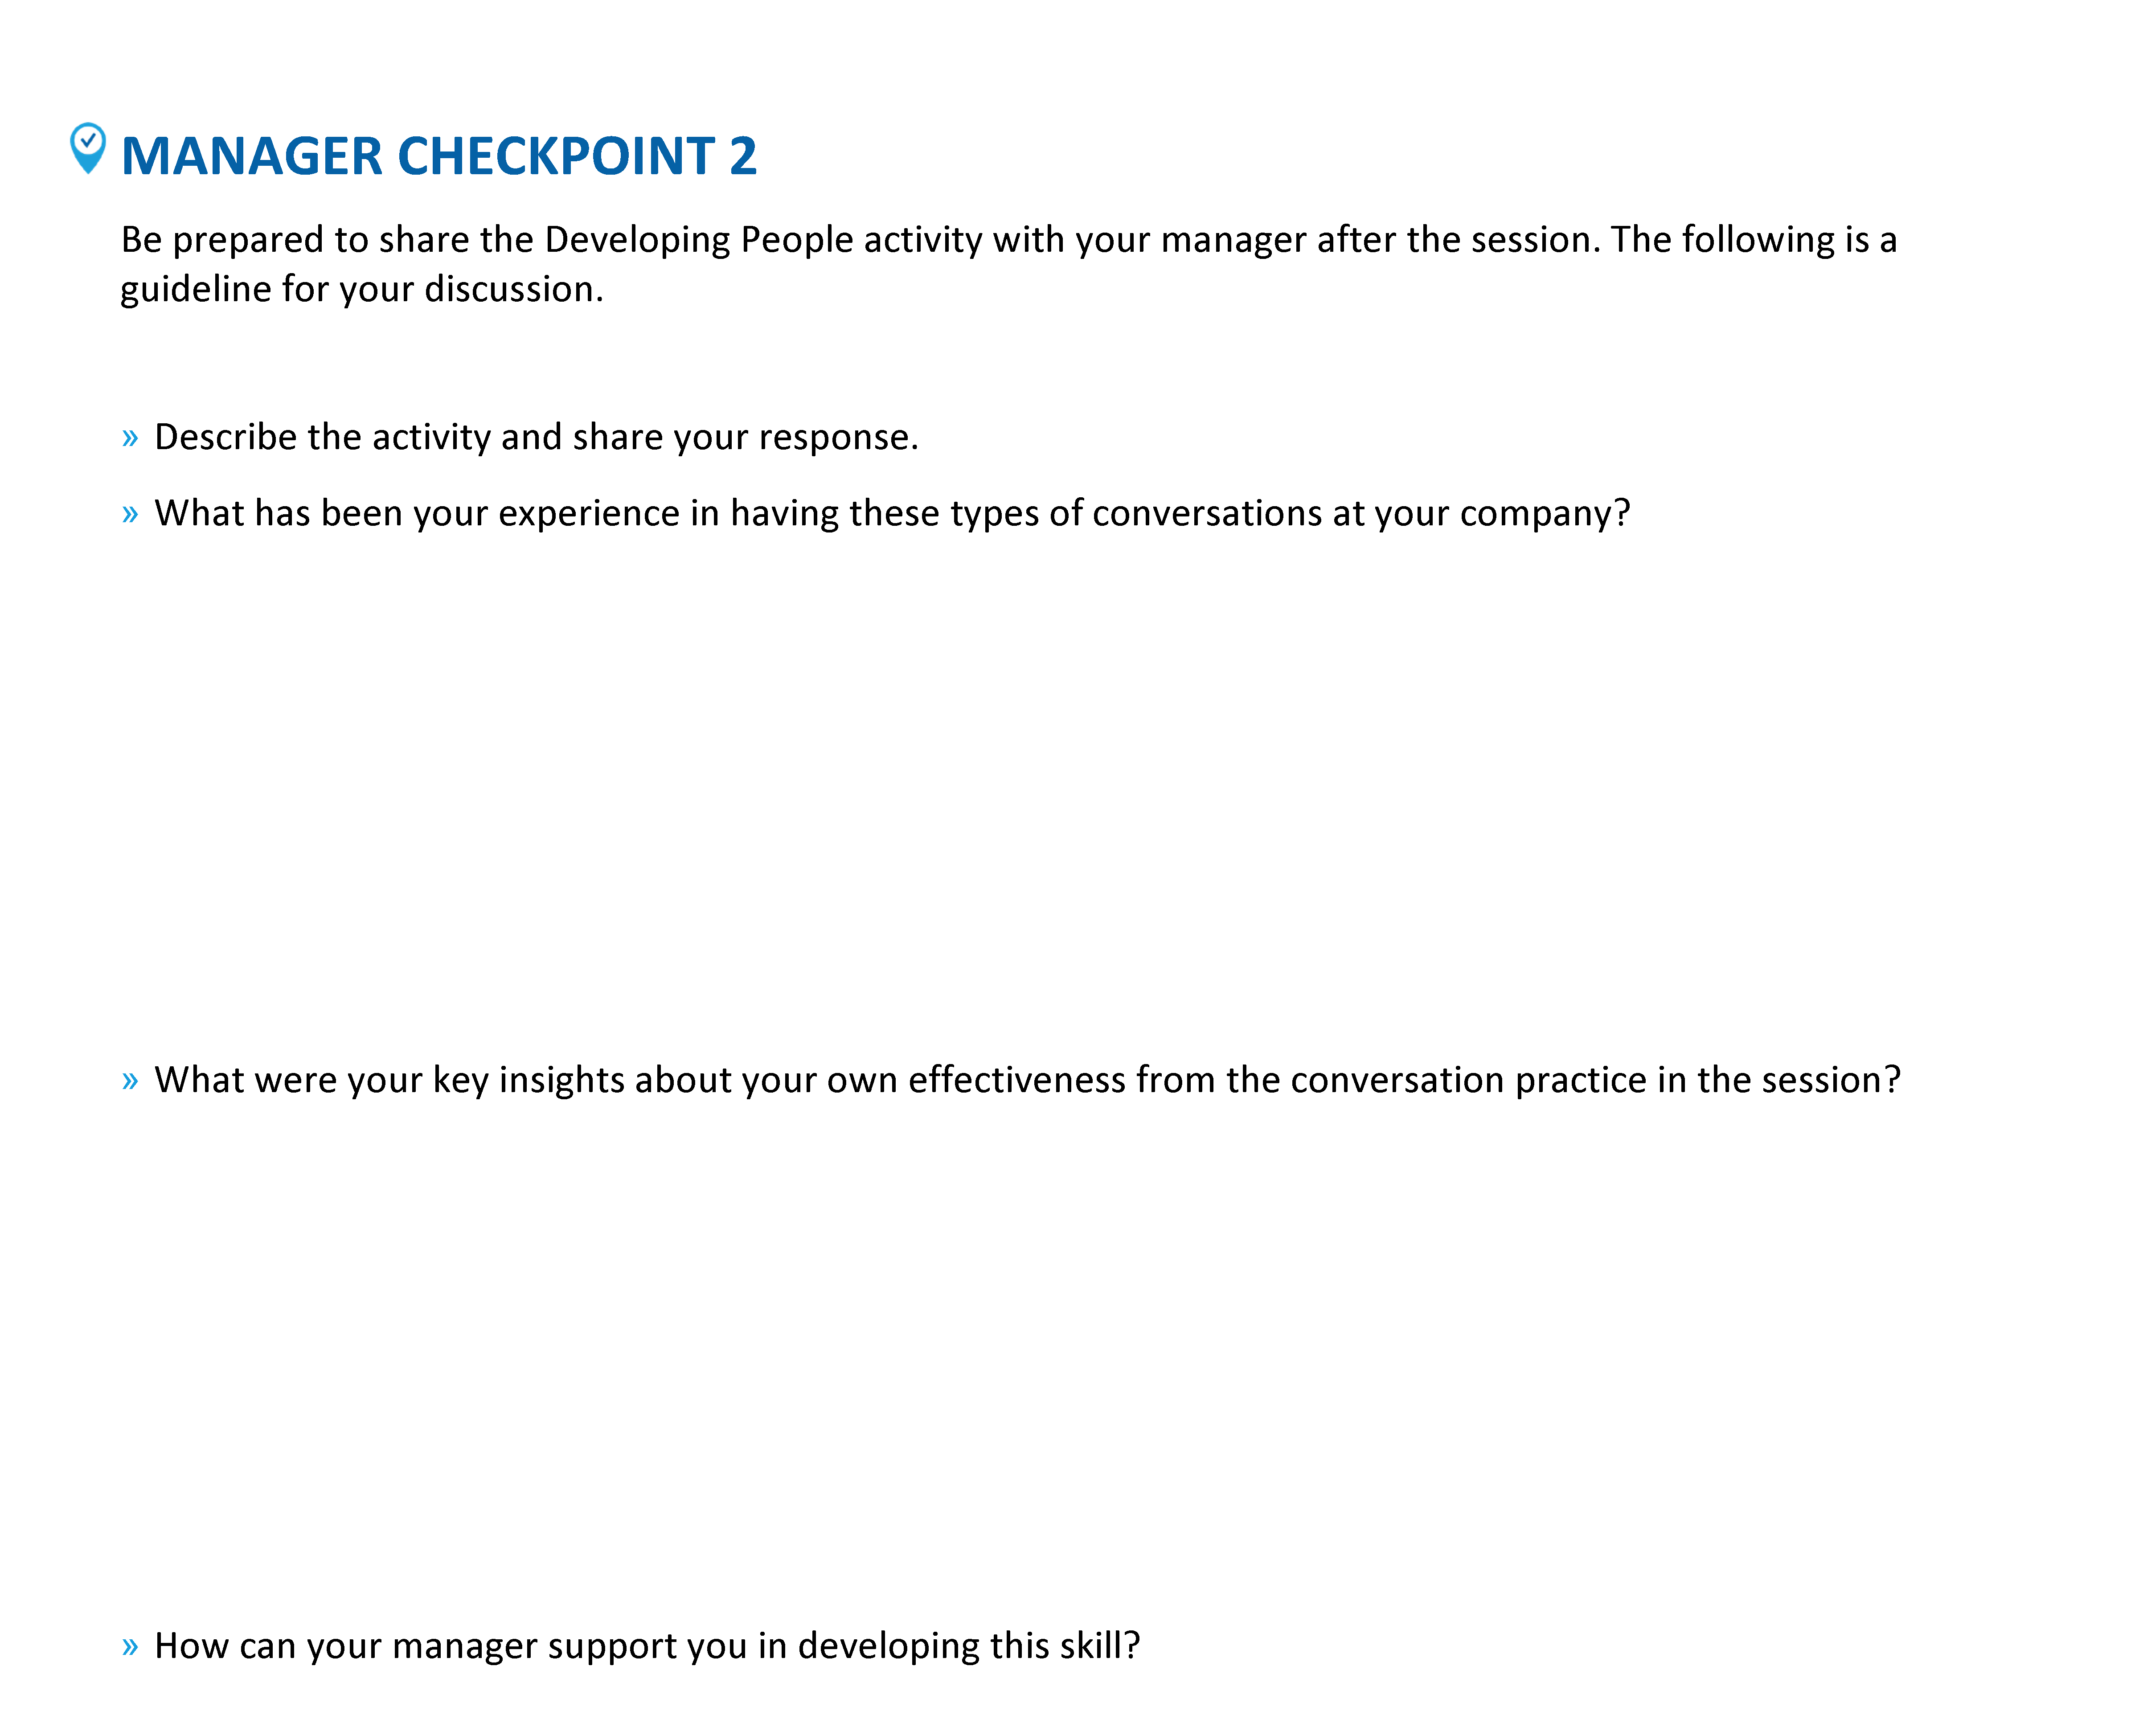 example of a manager checkpoint document